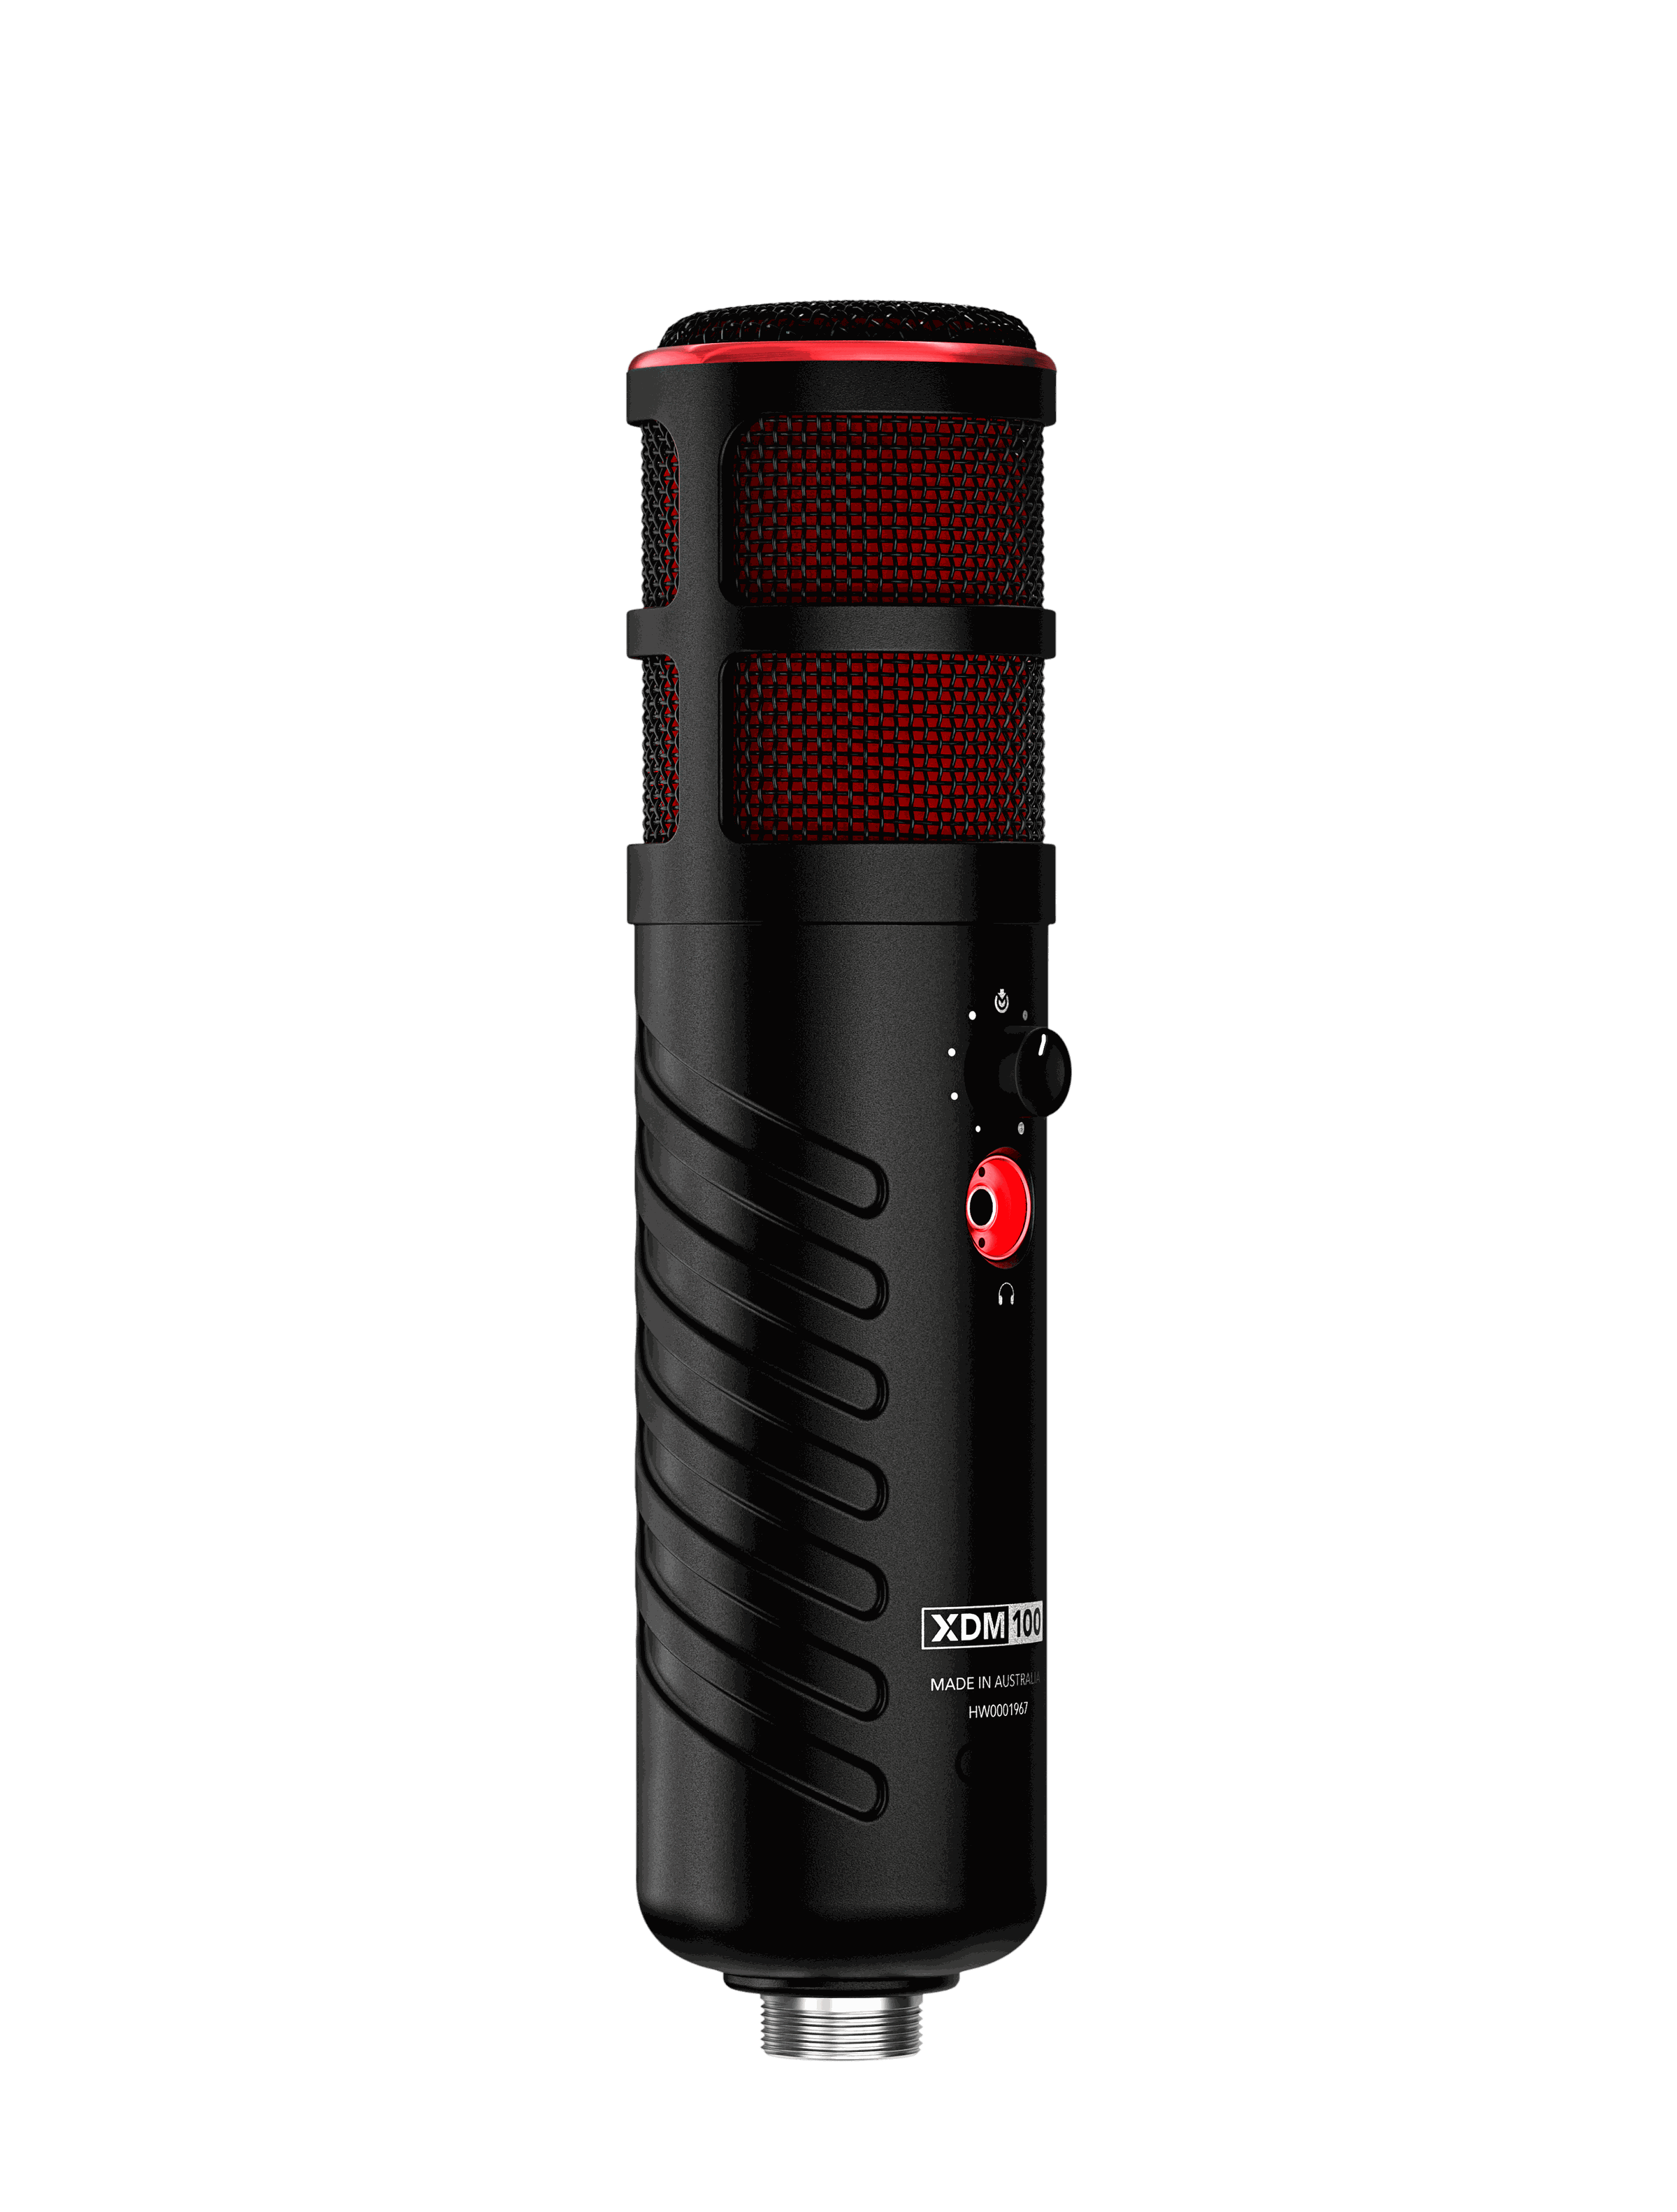 The Rode X XDM-100 microphone at a side angle.